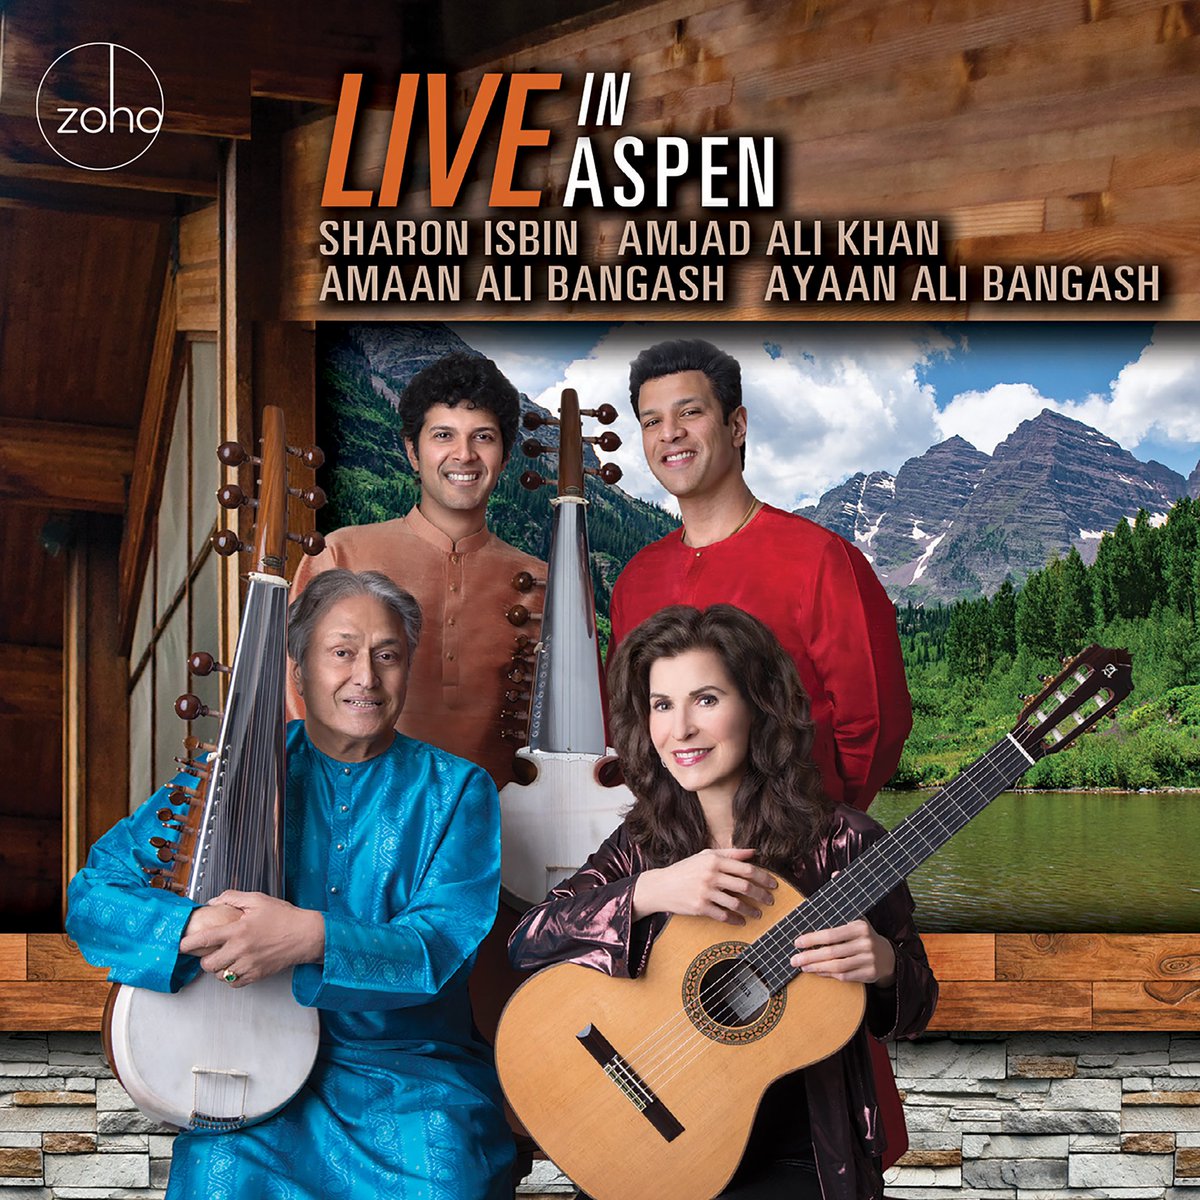 LIVE IN ASPEN is now available for pre-order at Amazon in advance of the June 21 worldwide release: amazon.com/Live-Aspen-Sha… #liveinaspen